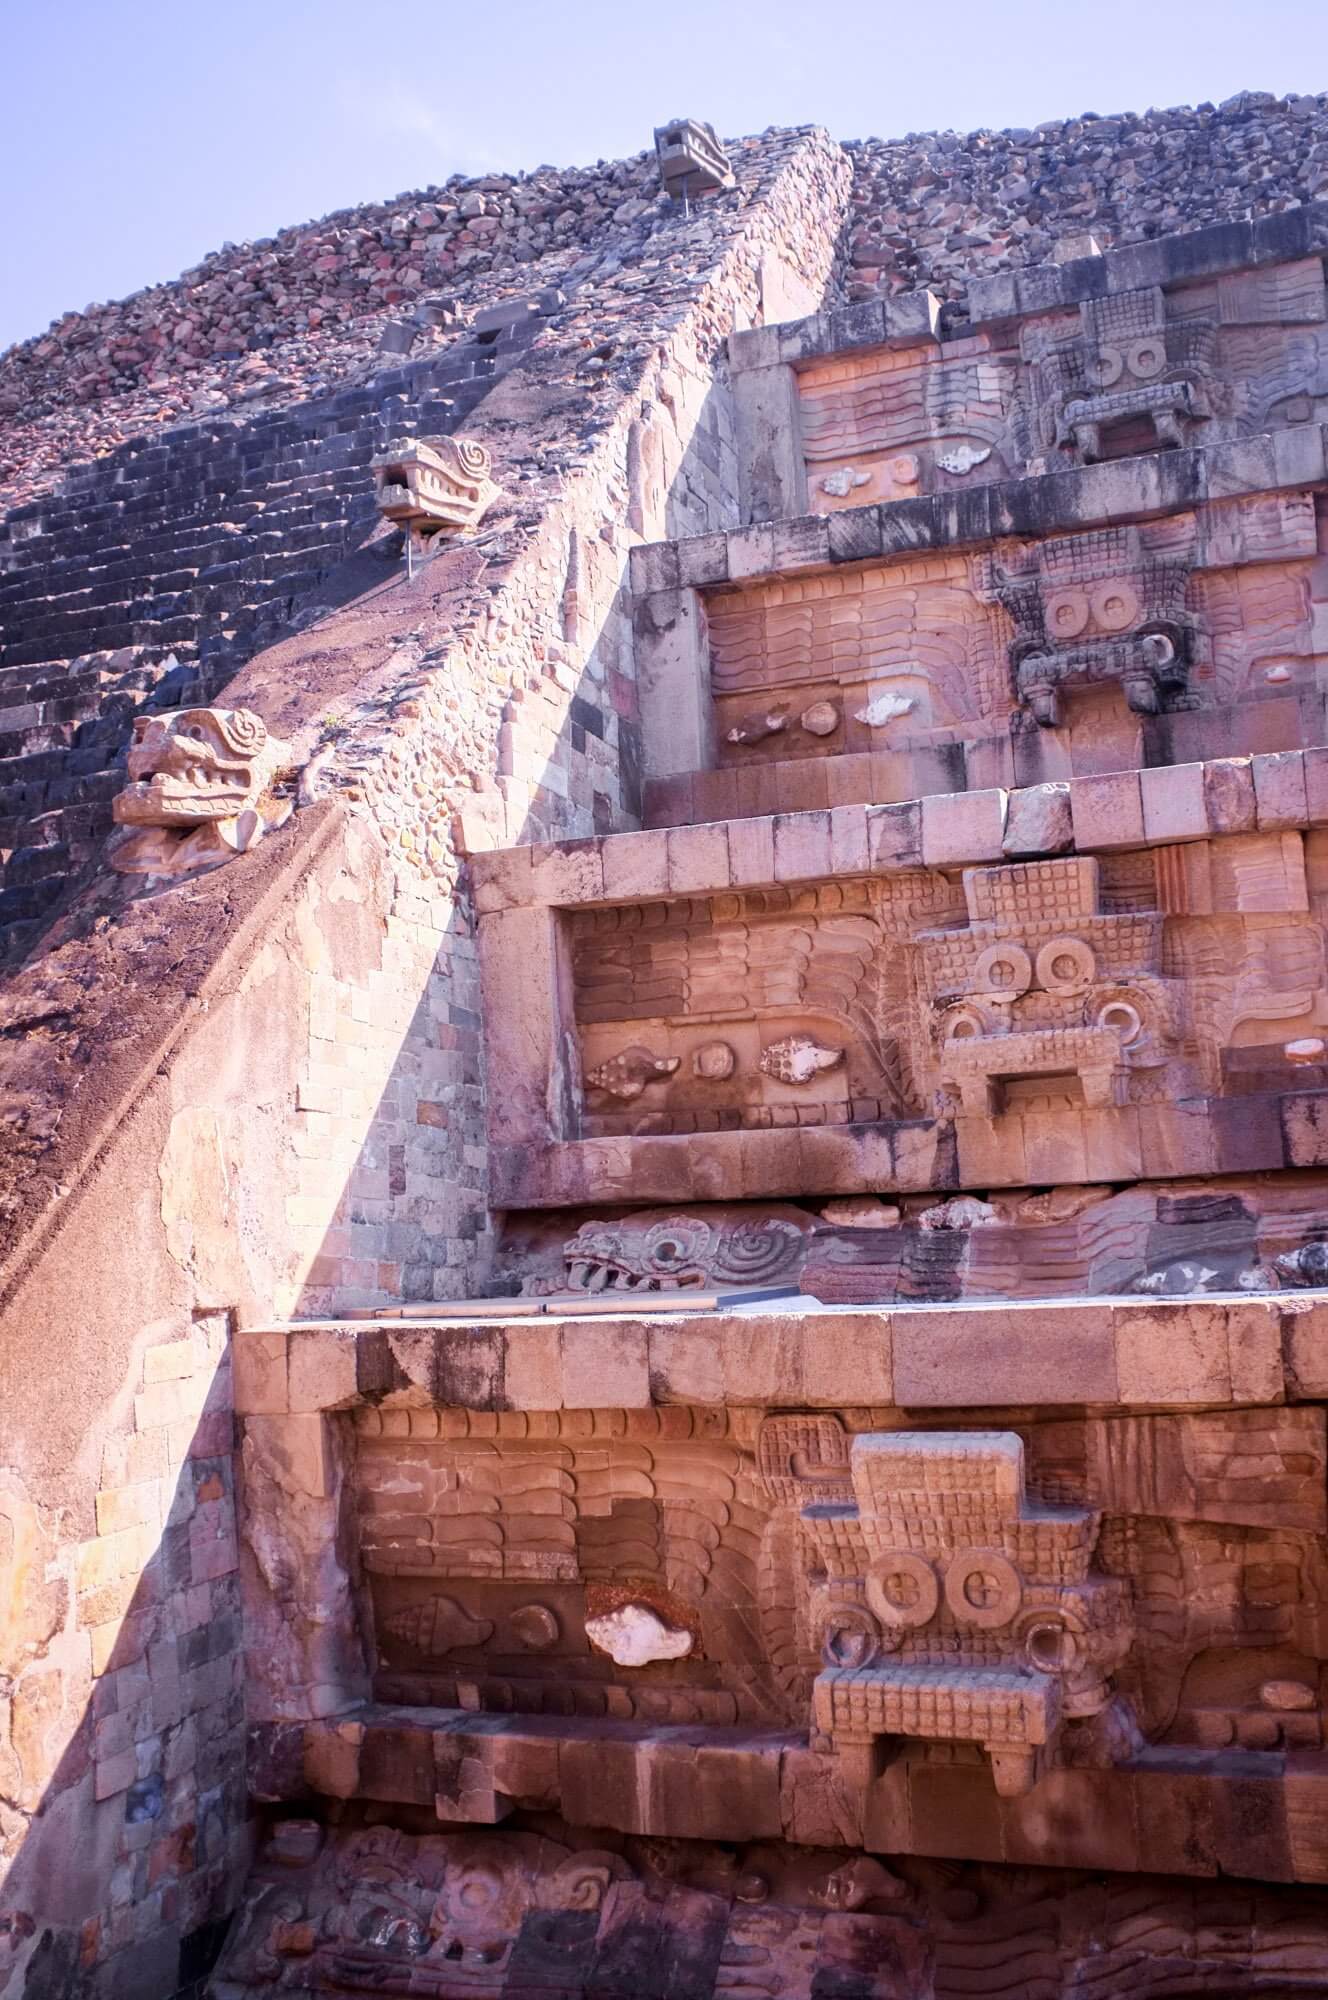 Teotihuacan’s famous Temple of the Feathered Serpent (or Temple of Quetzalcoatl)